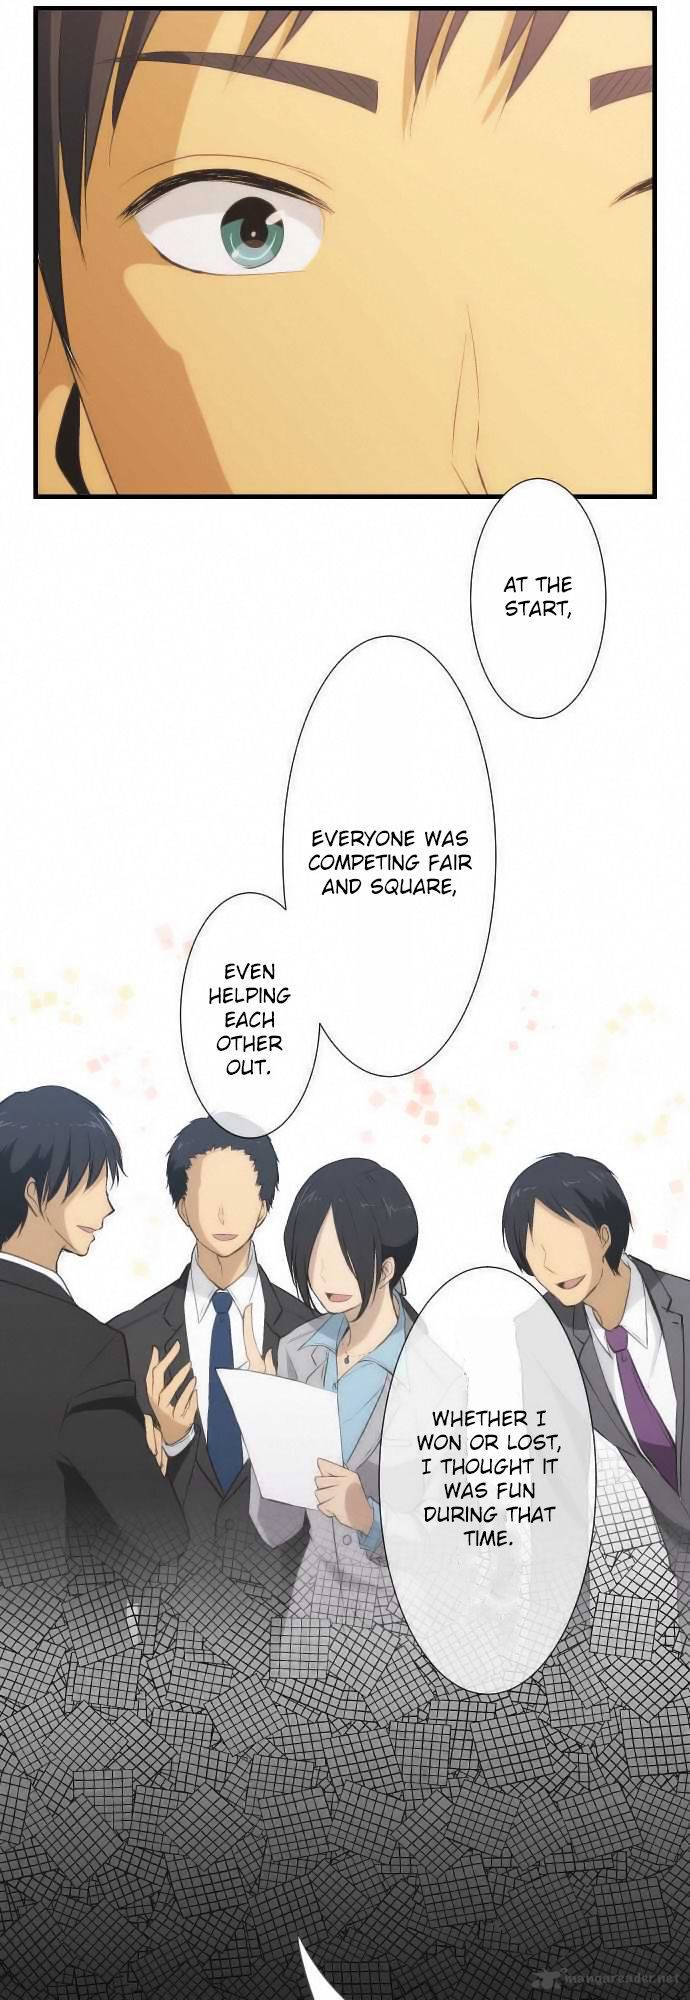 Relife 38 18